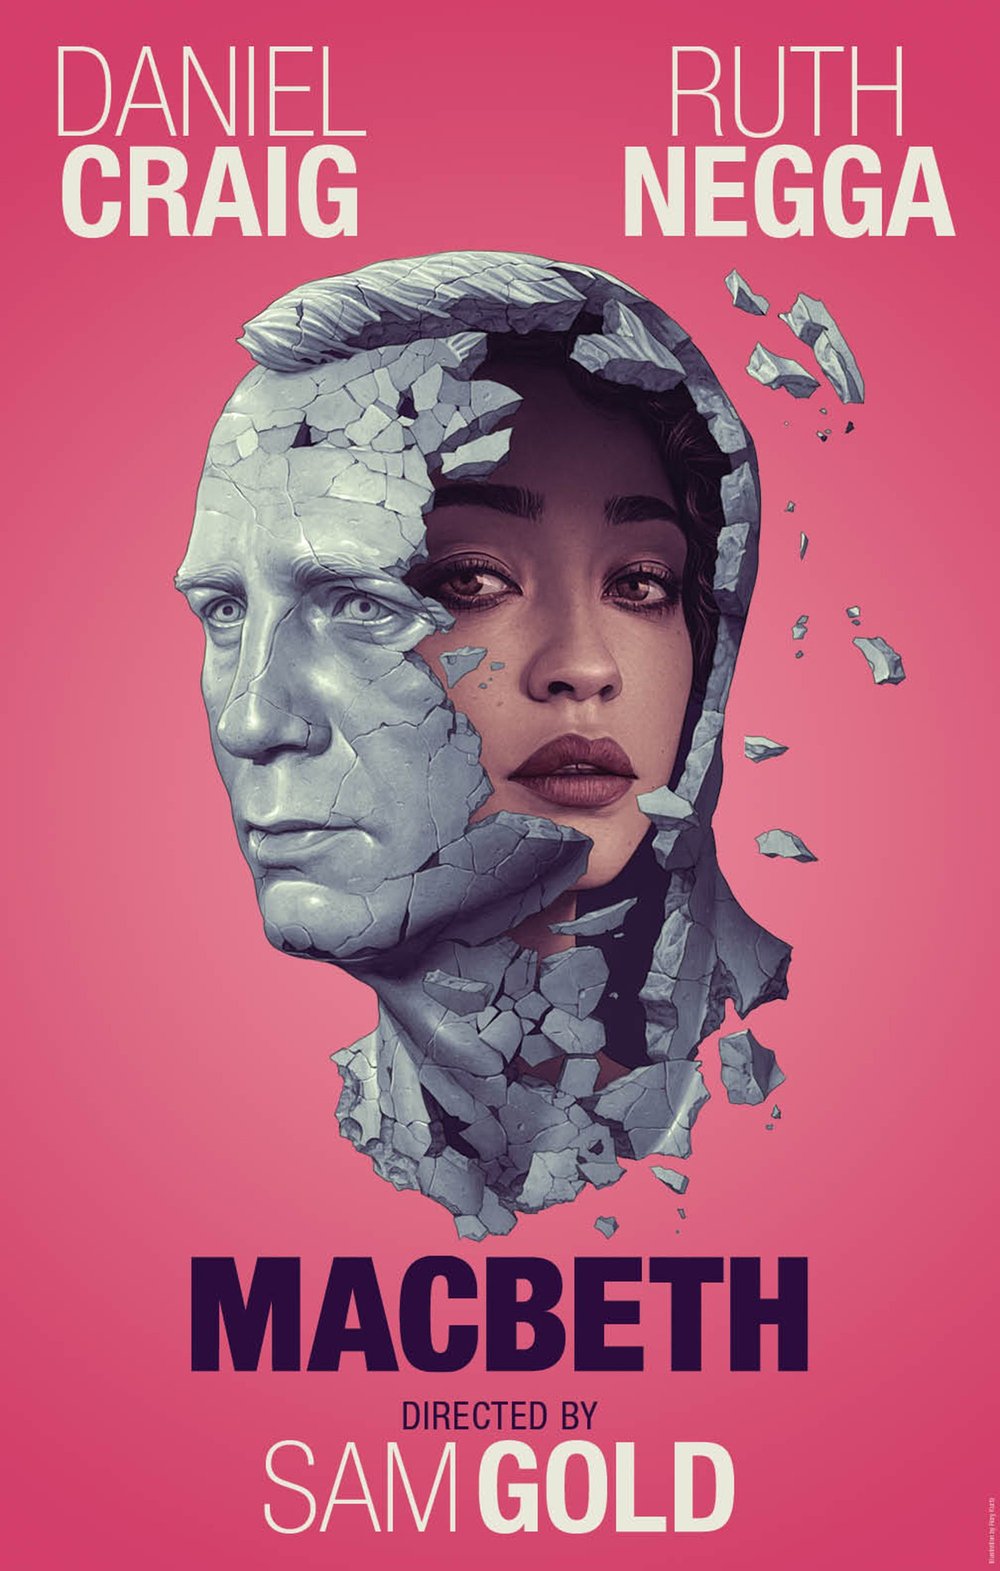 Daniel Craig and Ruth Negga take on the roles of Macbeth and Lady Macbeth on Broadway this spring.